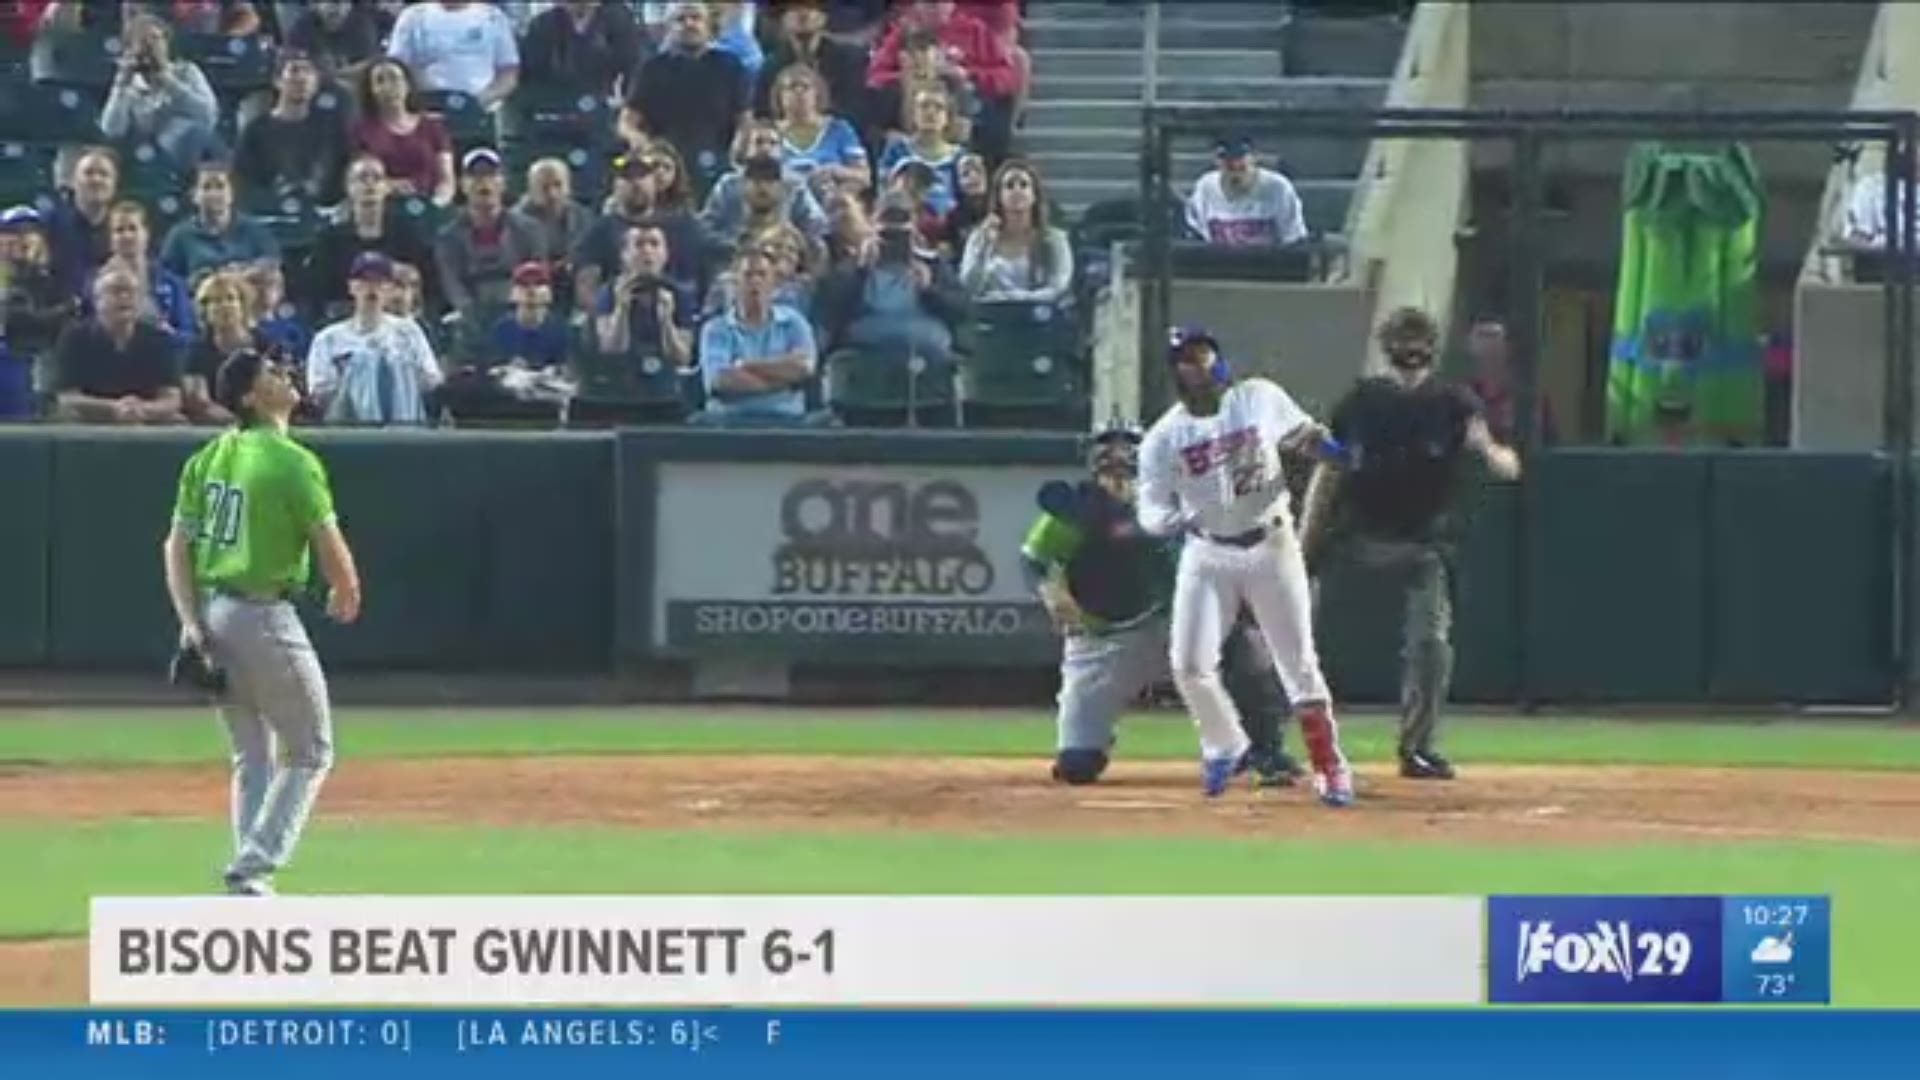 Vladimir Guerrero Jr. hit his first homer at the Triple-A level in the Bisons 6-1 win over Gwinnett Wednesday night.